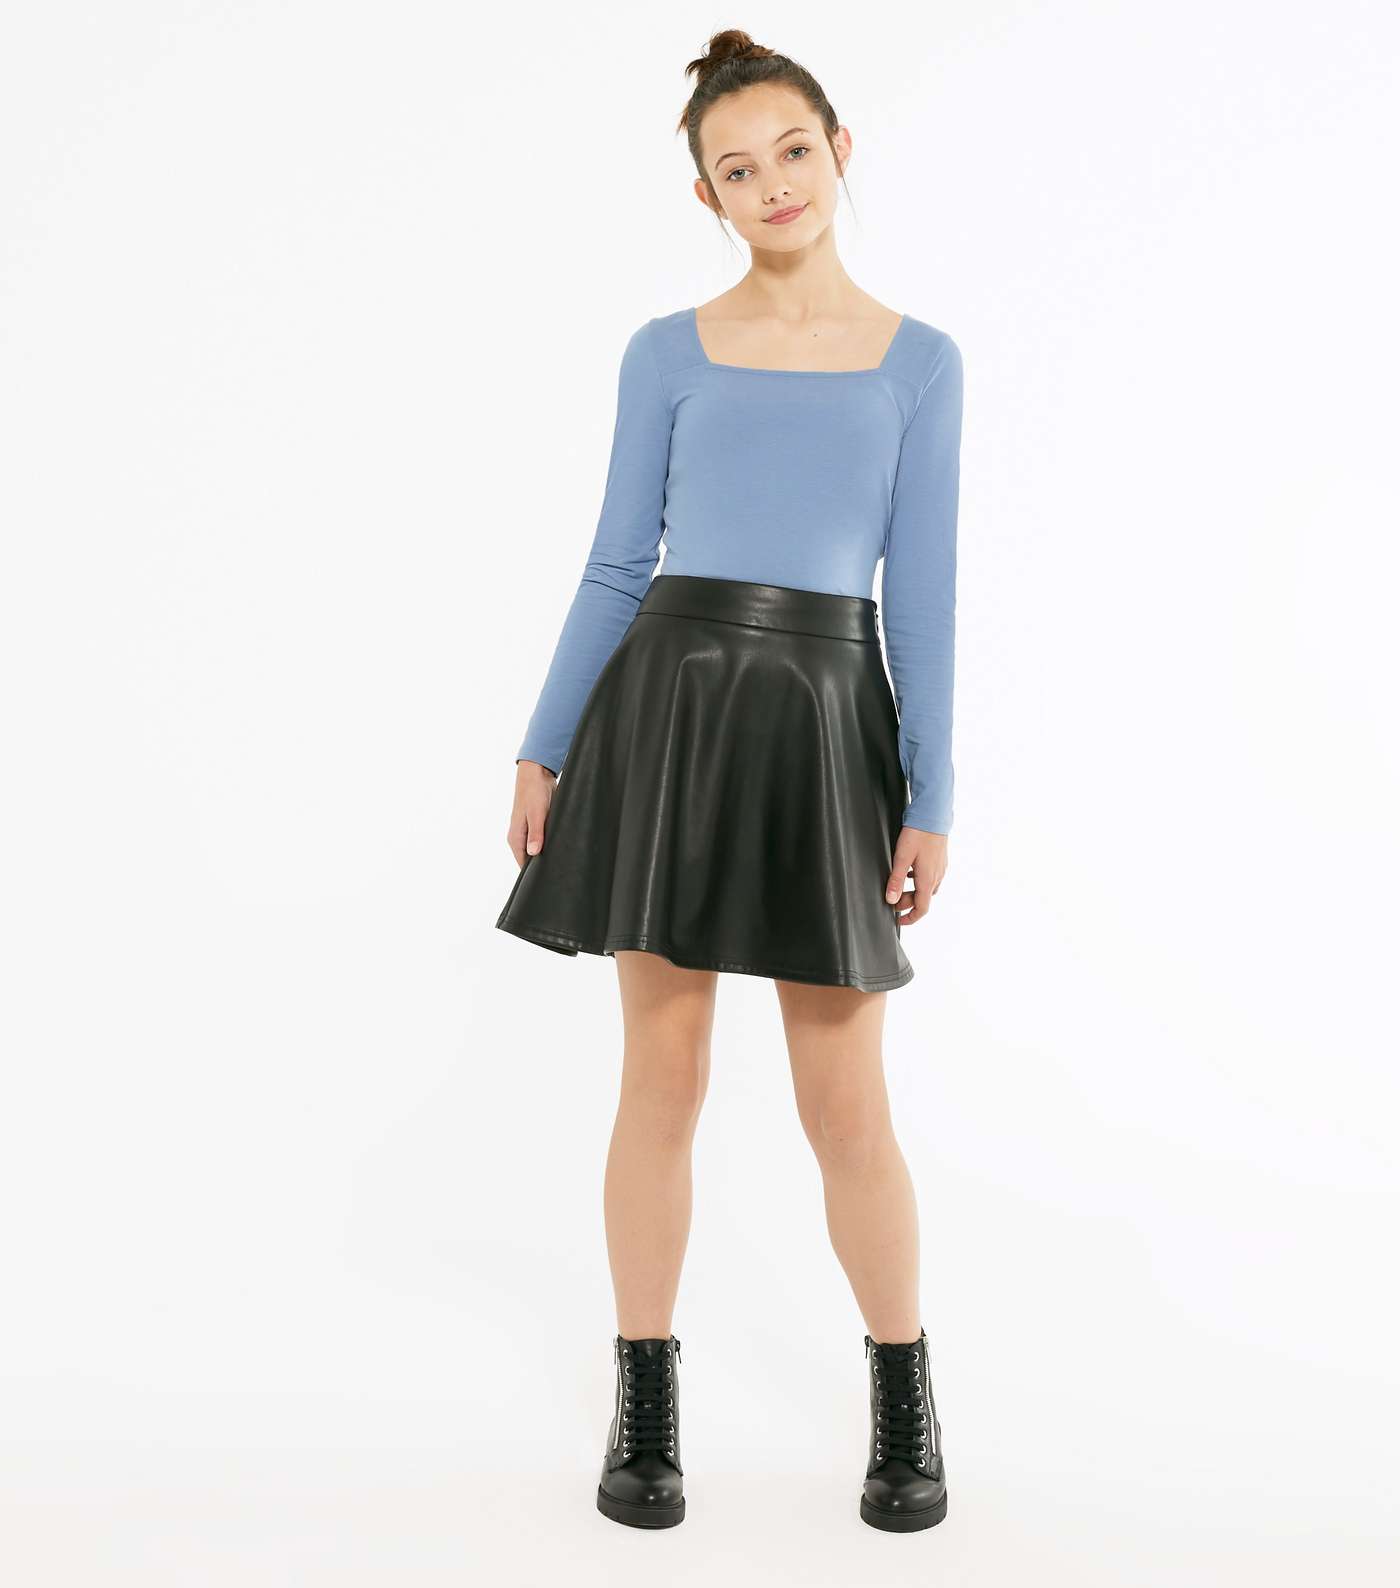 Girls Pale Blue Square Neck Long Sleeve Top Image 2